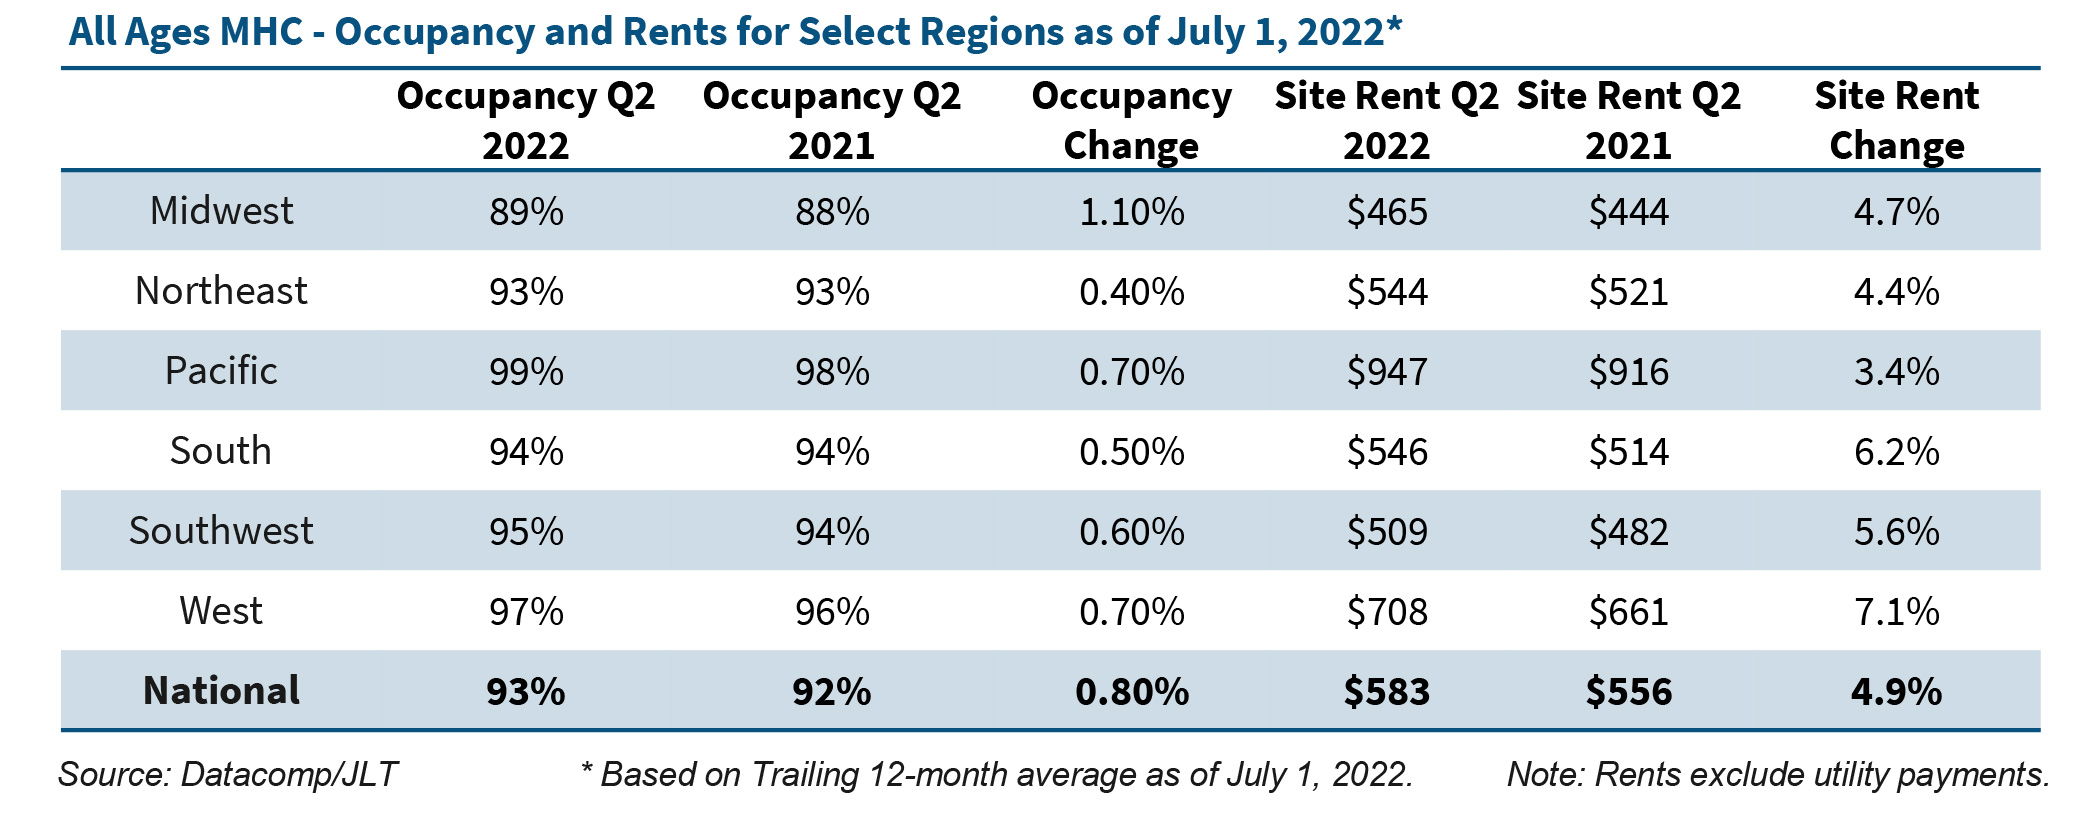 All Ages MHC - Occupancy and Rents for Select Regions as of July 1, 2022*